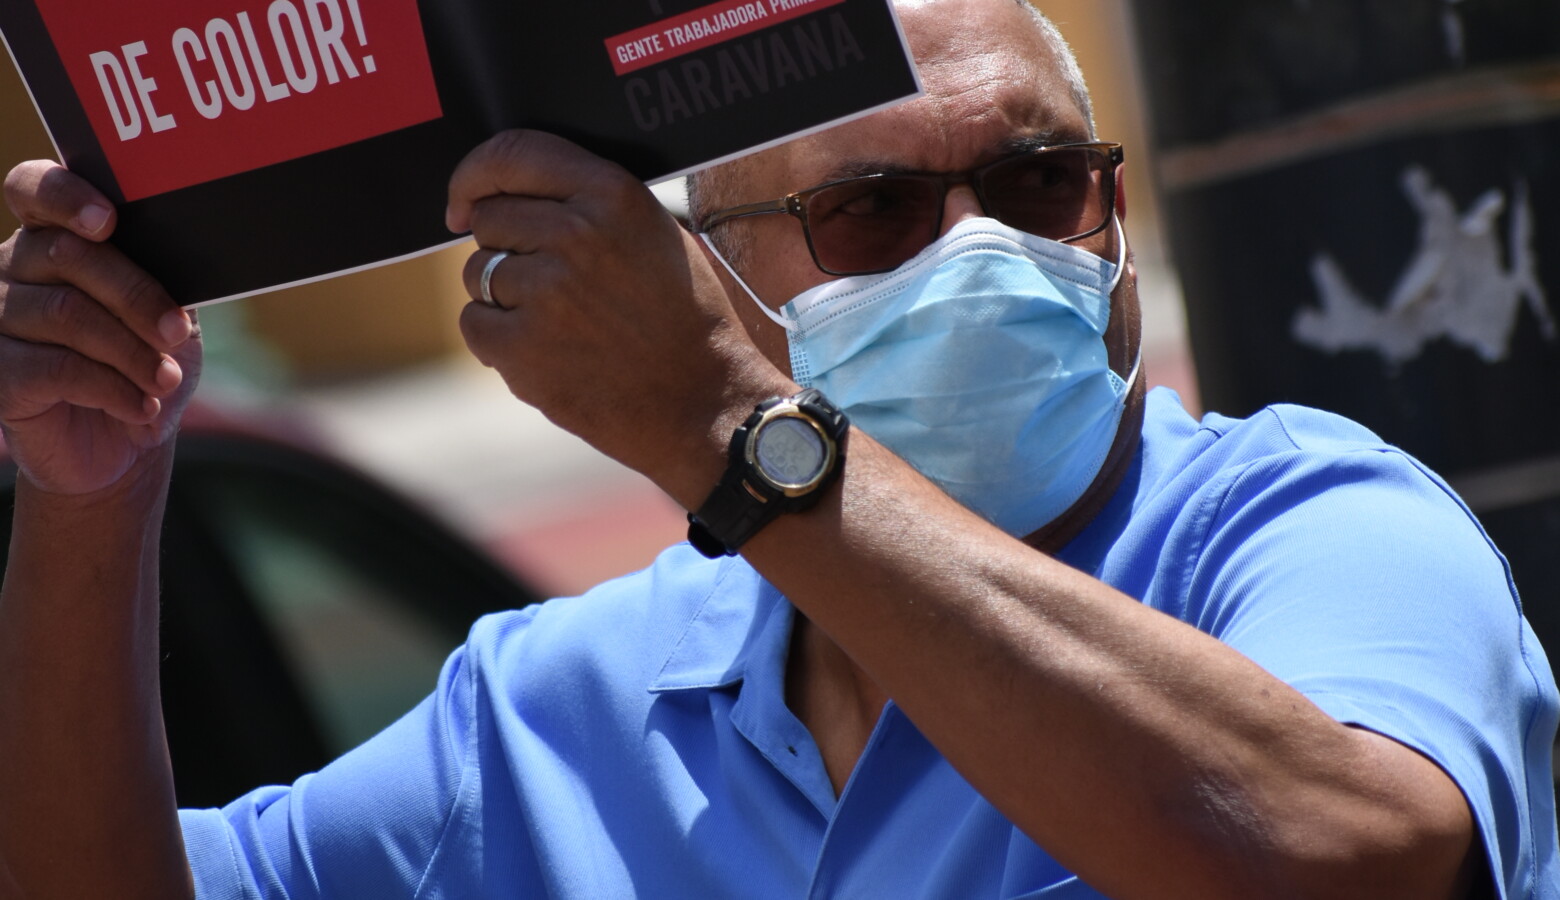 Democratic gubernatorial candidate Dr. Woody Myers wears a face mask during a union-organized rally in support of the Black Lives Matter movement. (Justin Hicks/IPB News)